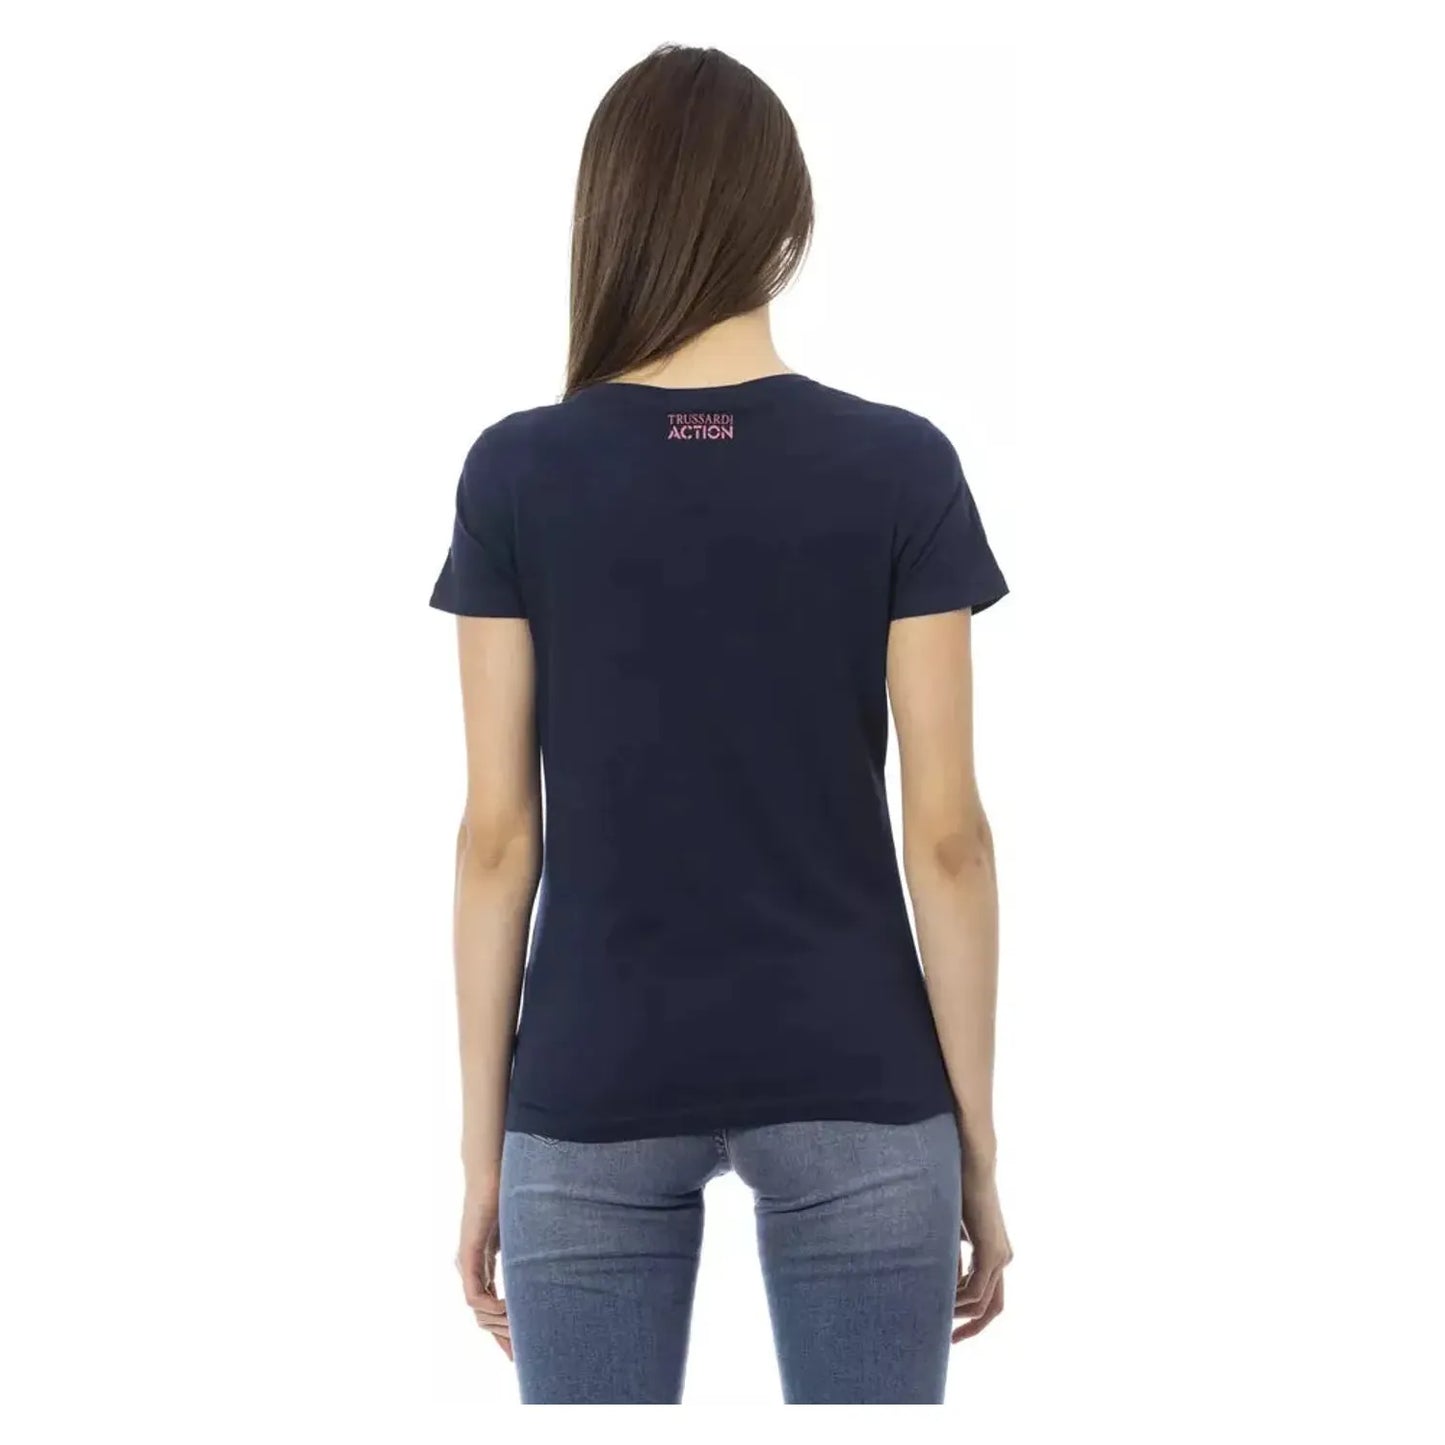 Trussardi Action Chic Blue Short Sleeve T-Shirt with Front Print blue-cotton-tops-t-shirt-22